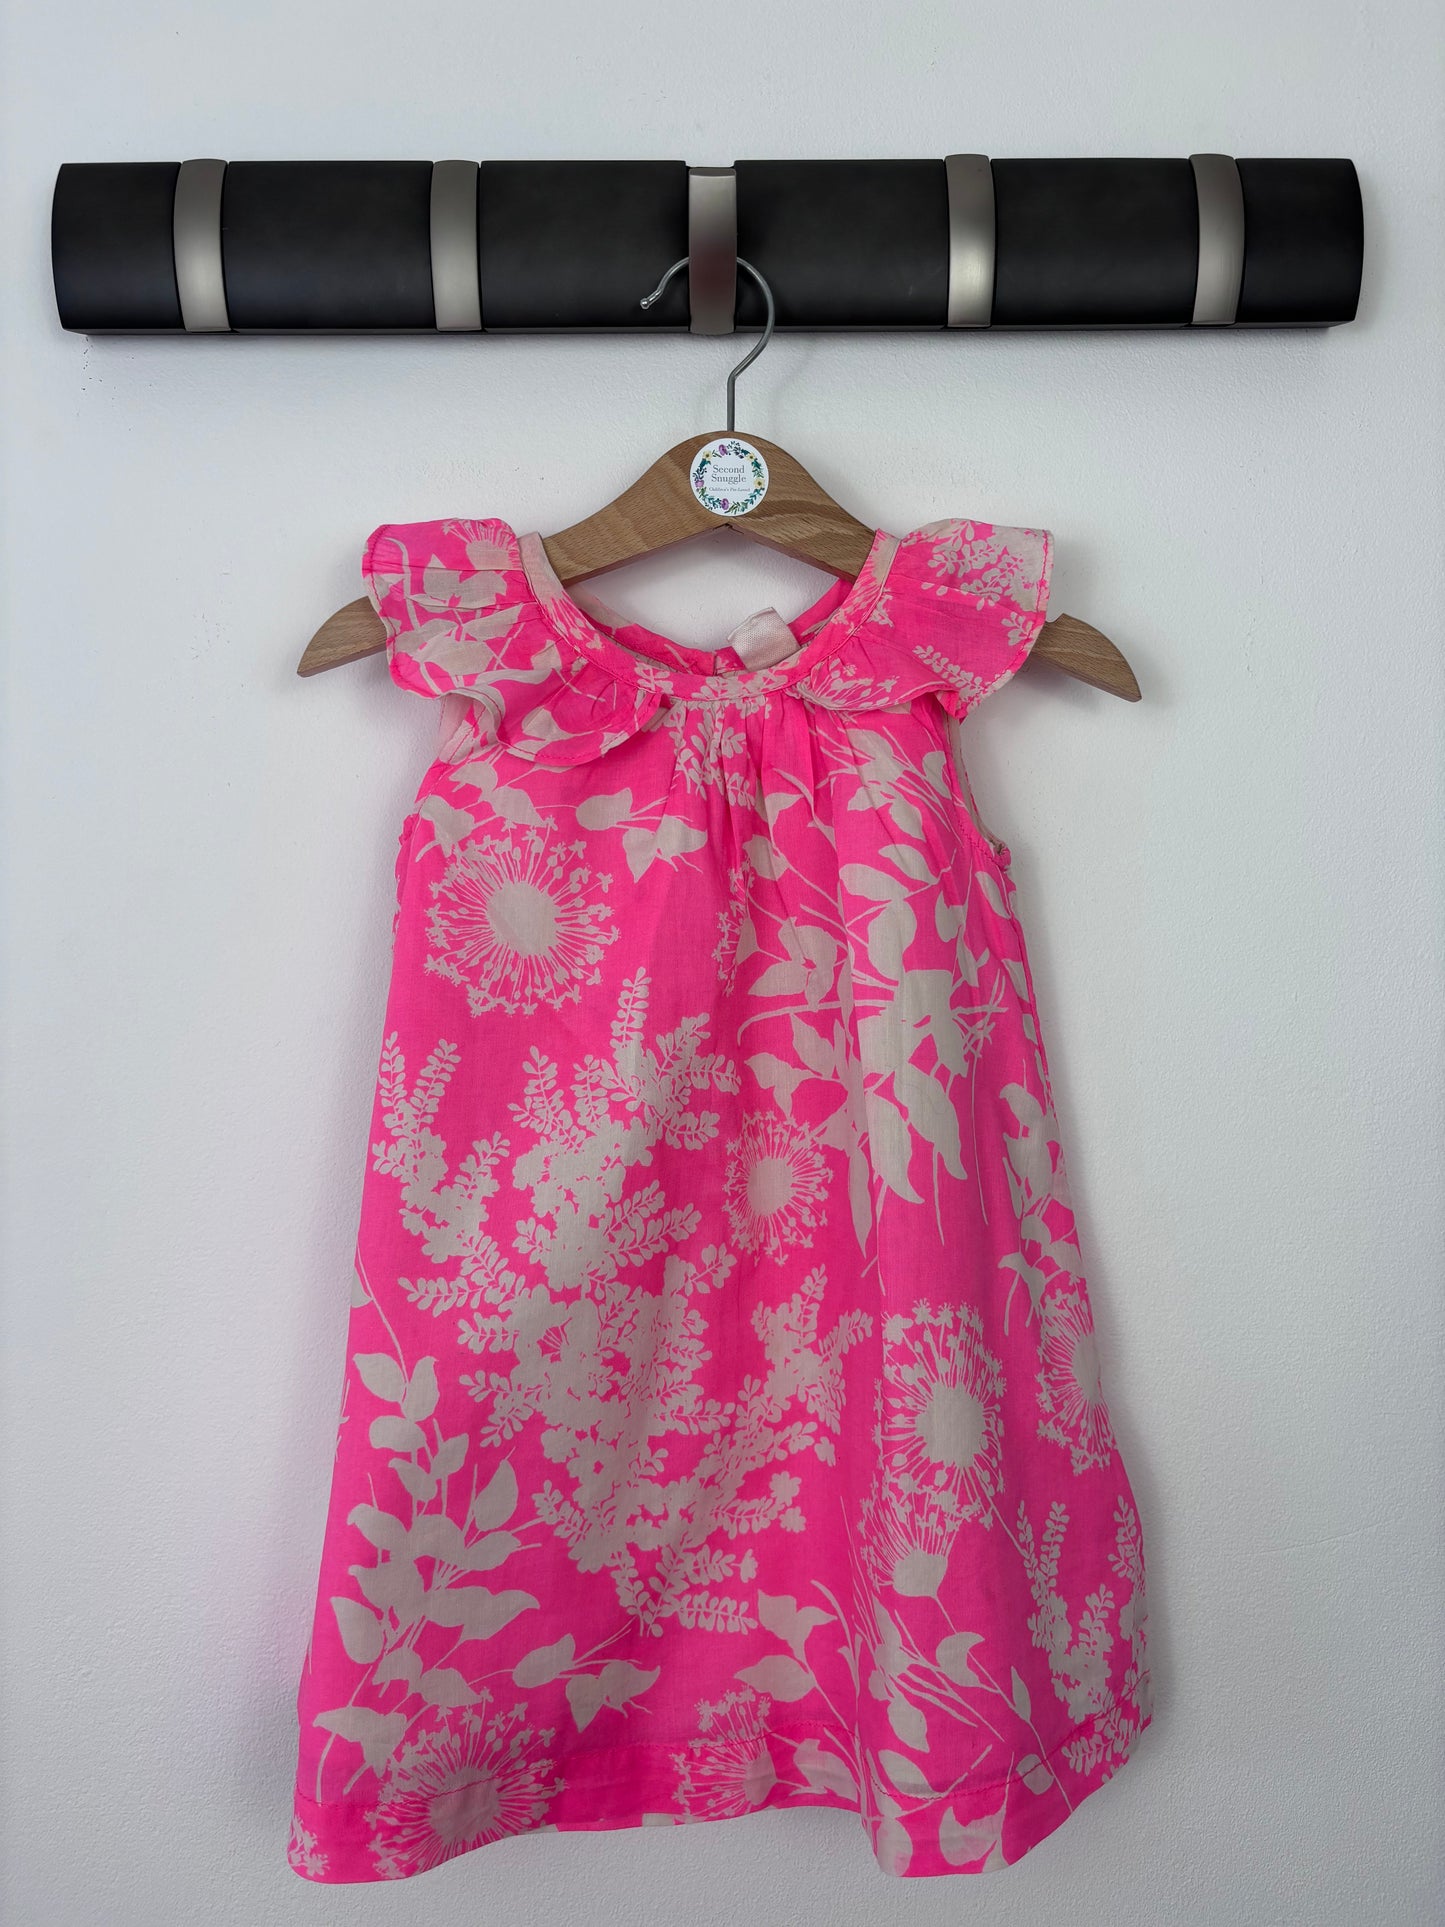 Baby Gap 2 Years-Dresses-Second Snuggle Preloved